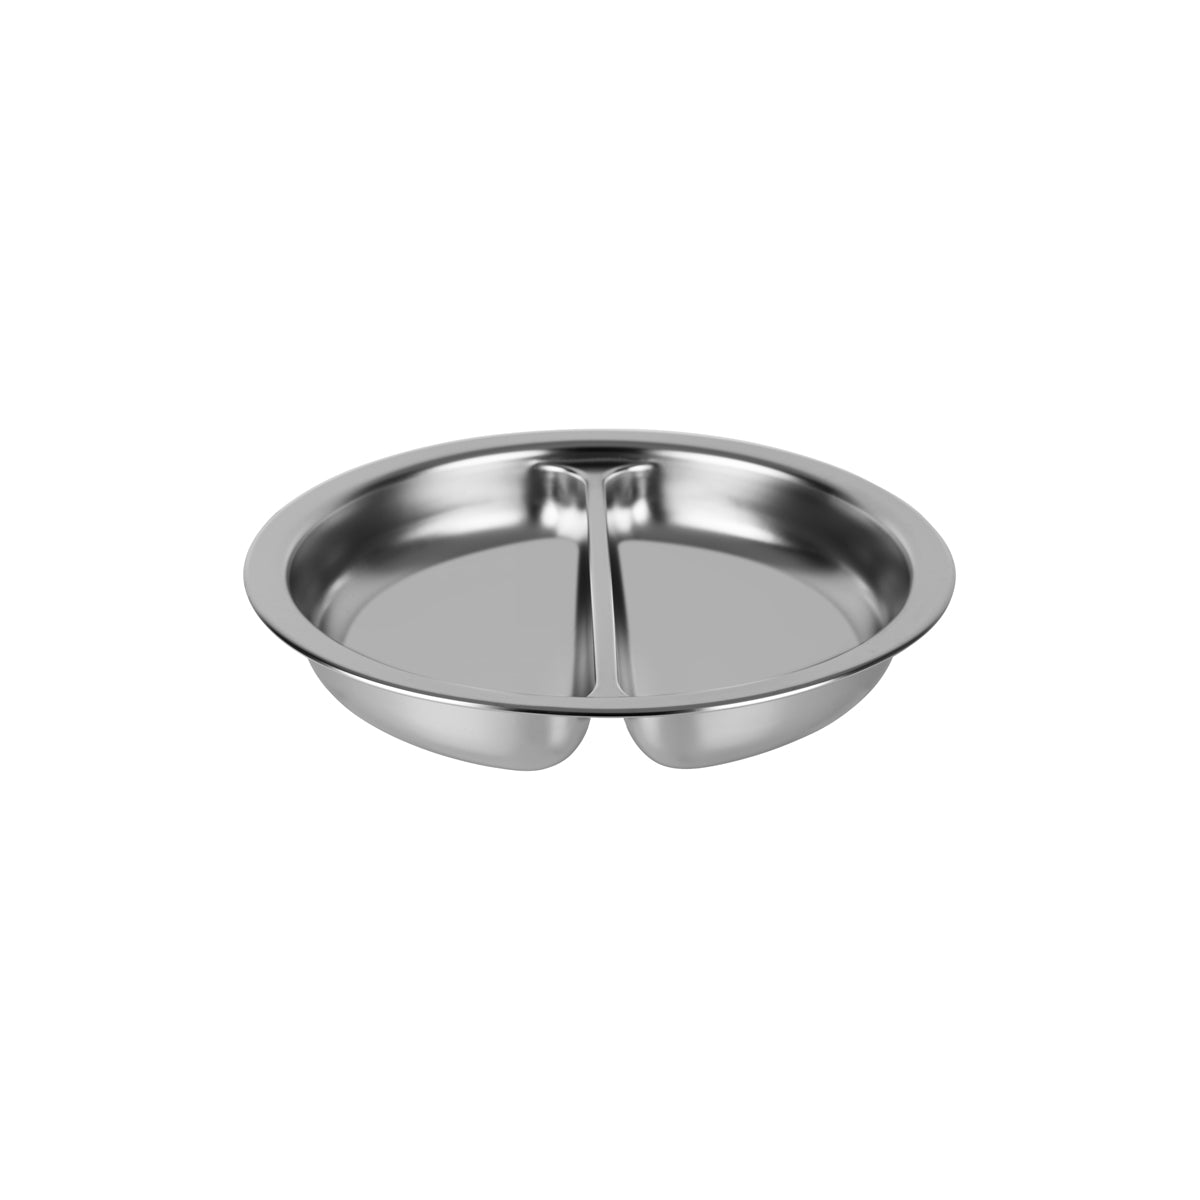 54915-D Chef Inox Round Divided Pan Stainless Steel to Suit 54915 Tomkin Australia Hospitality Supplies